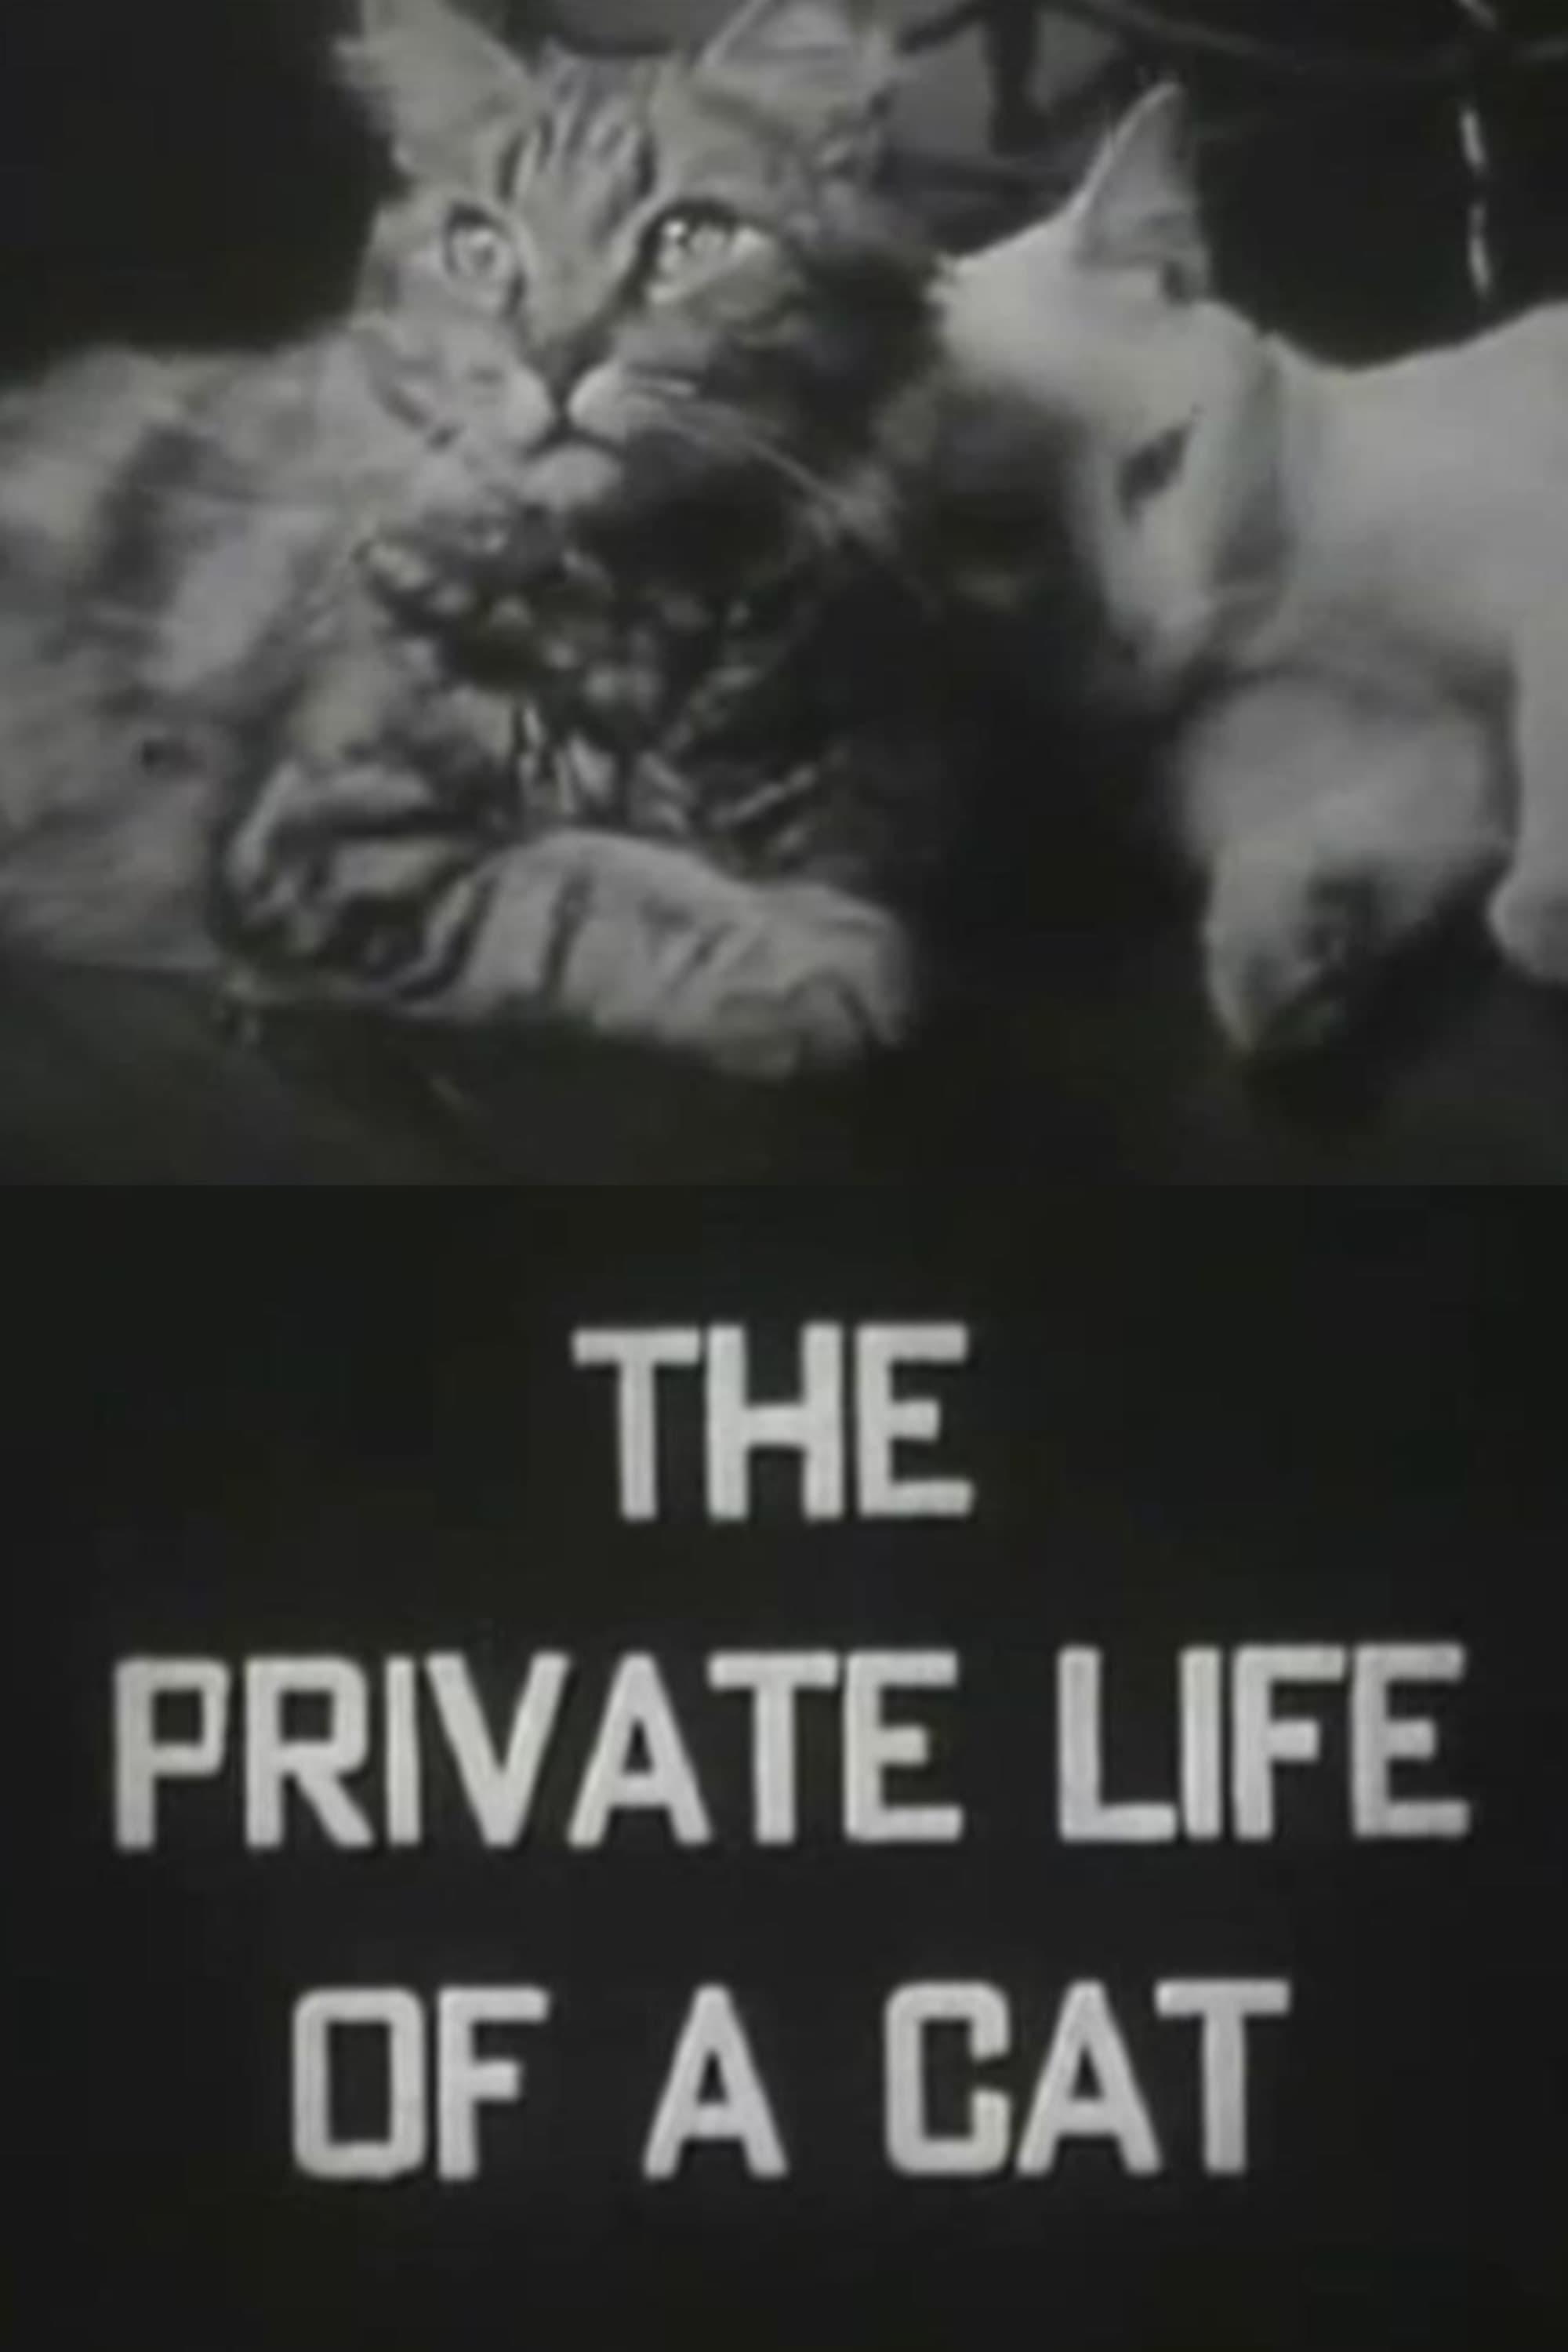 The Private Life of a Cat poster